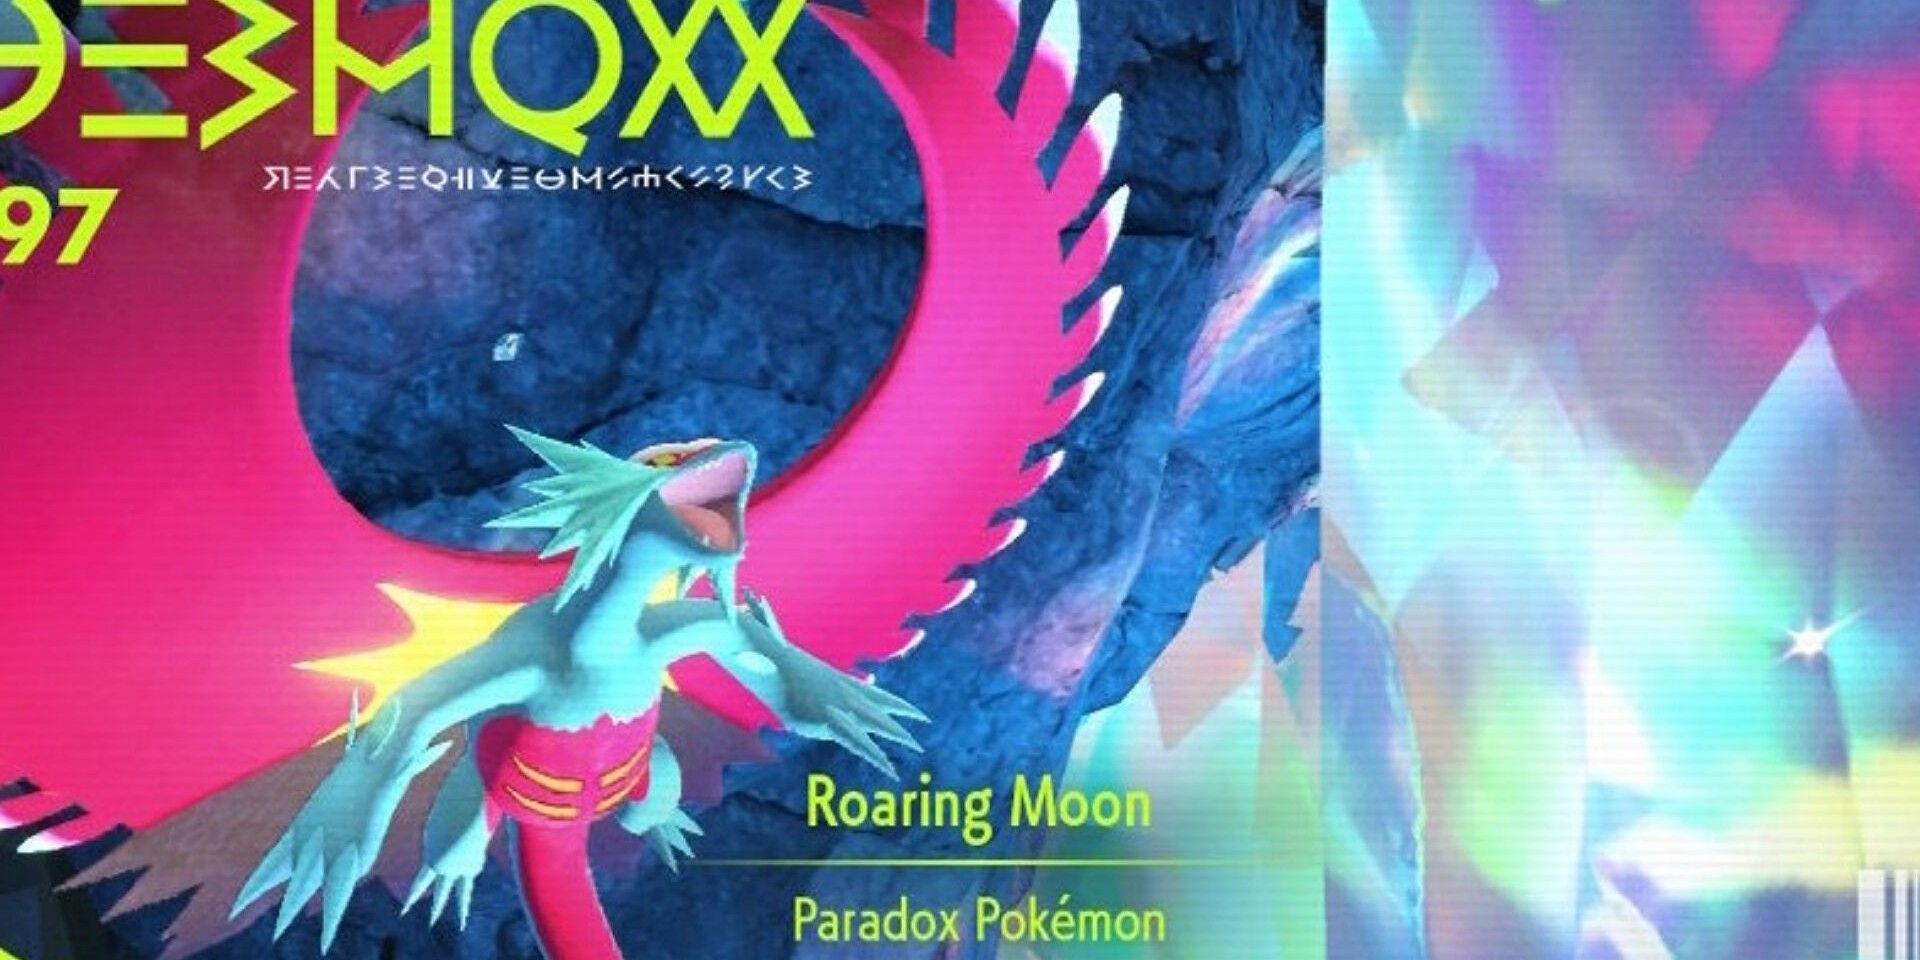 Pokemon Scarlet and Violet's Roaring Moon Pokédex entry shows it in a cave roaring at a crystal.